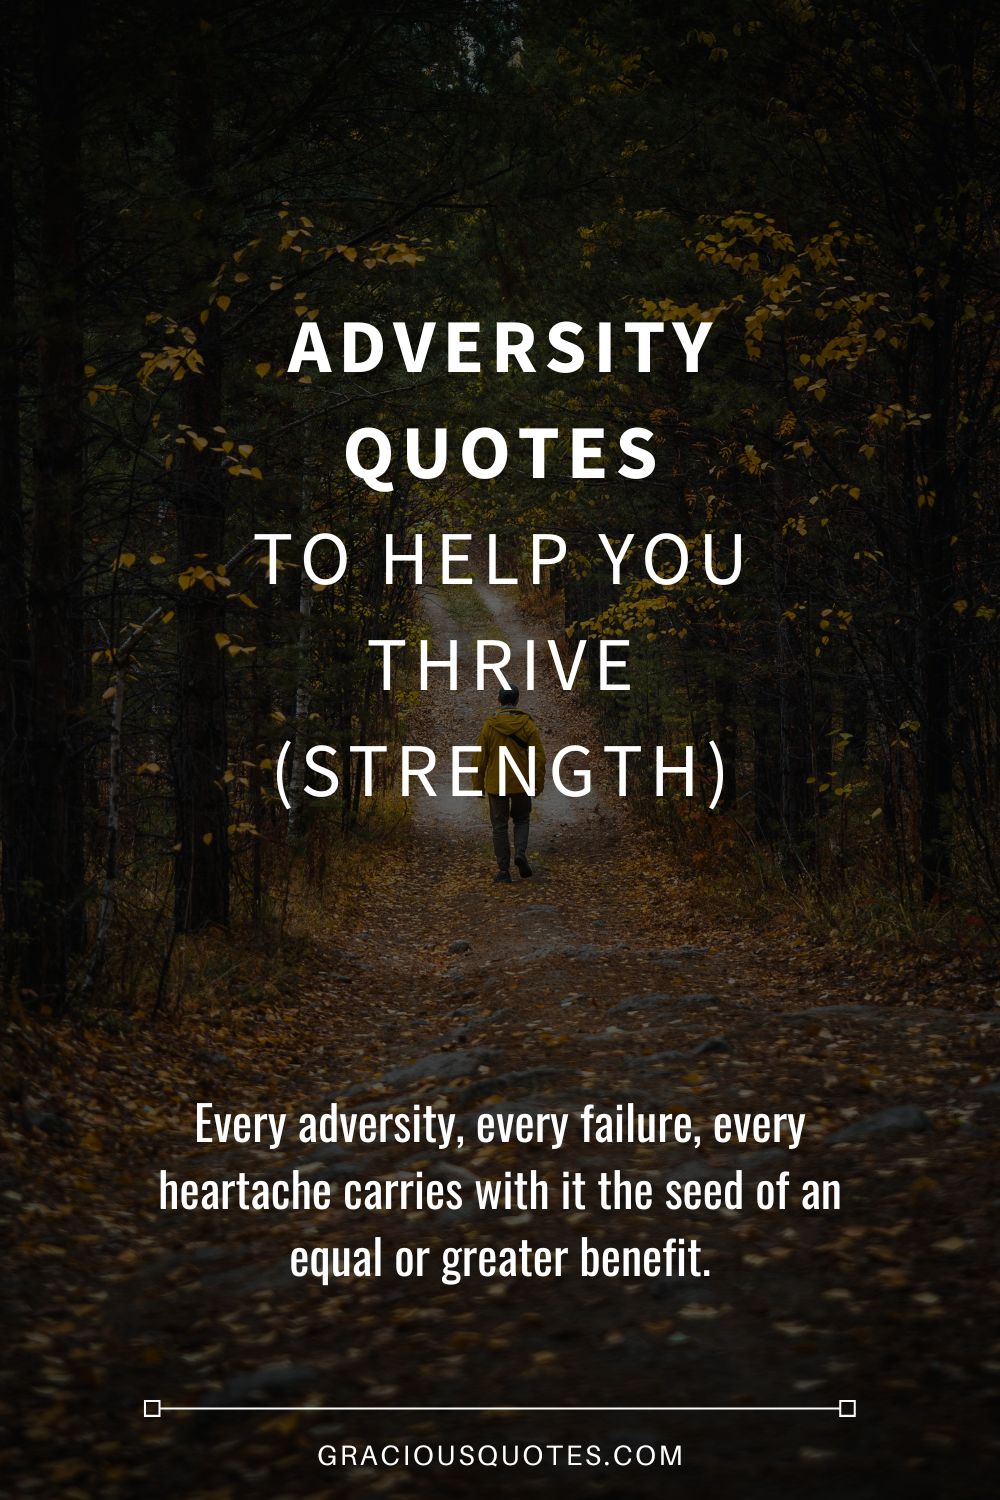 65 Fortitude Quotes to Inspire Strength (COURAGE)